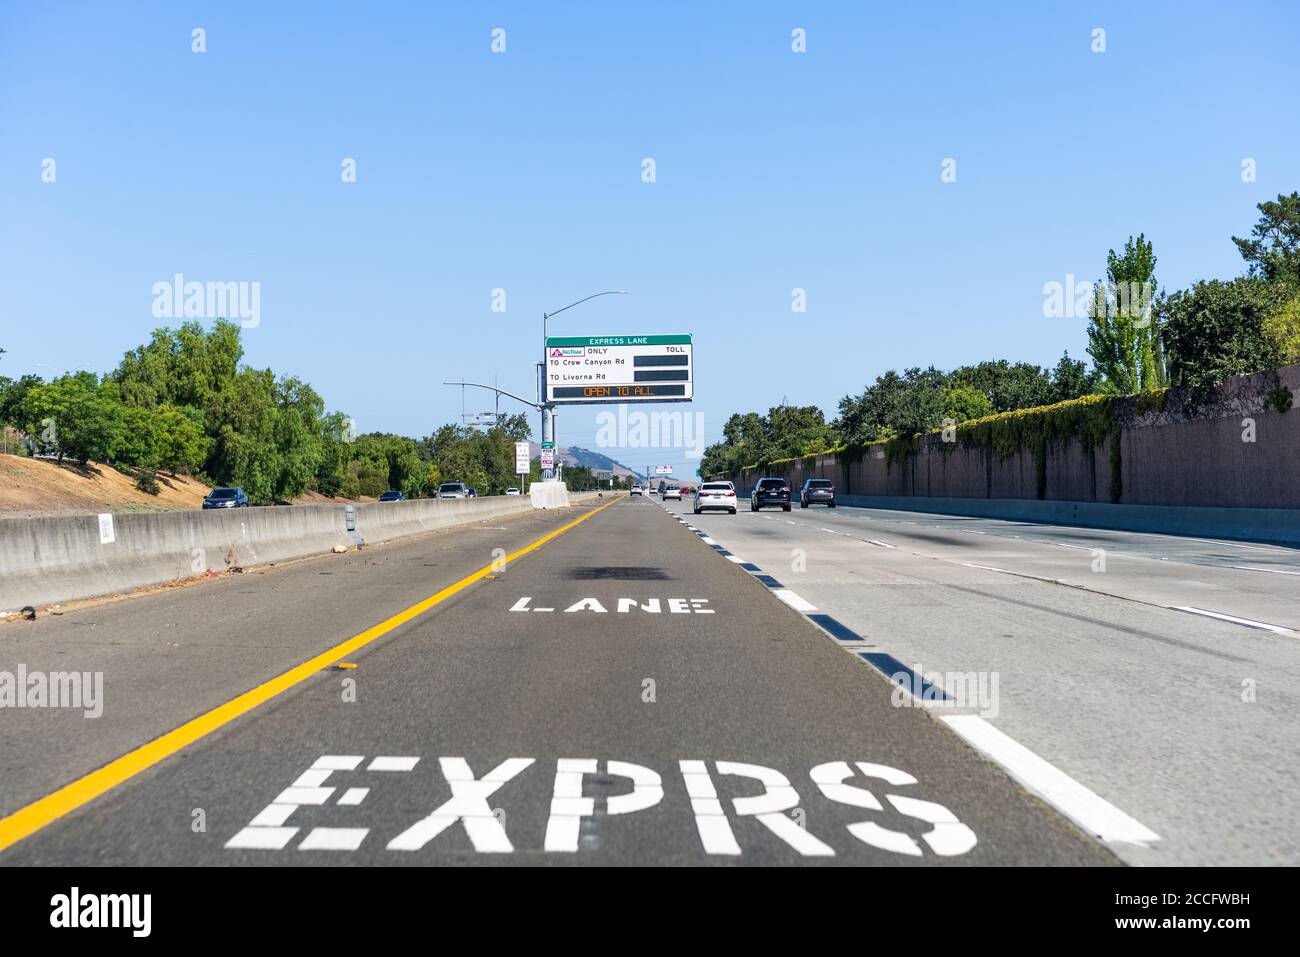 Aug 8, 2020 San Ramon / CA / USA - Designated express lane on a freeway in San Francisco Bay Area; Express lanes help manage lane capacity by allowing Stock Photo